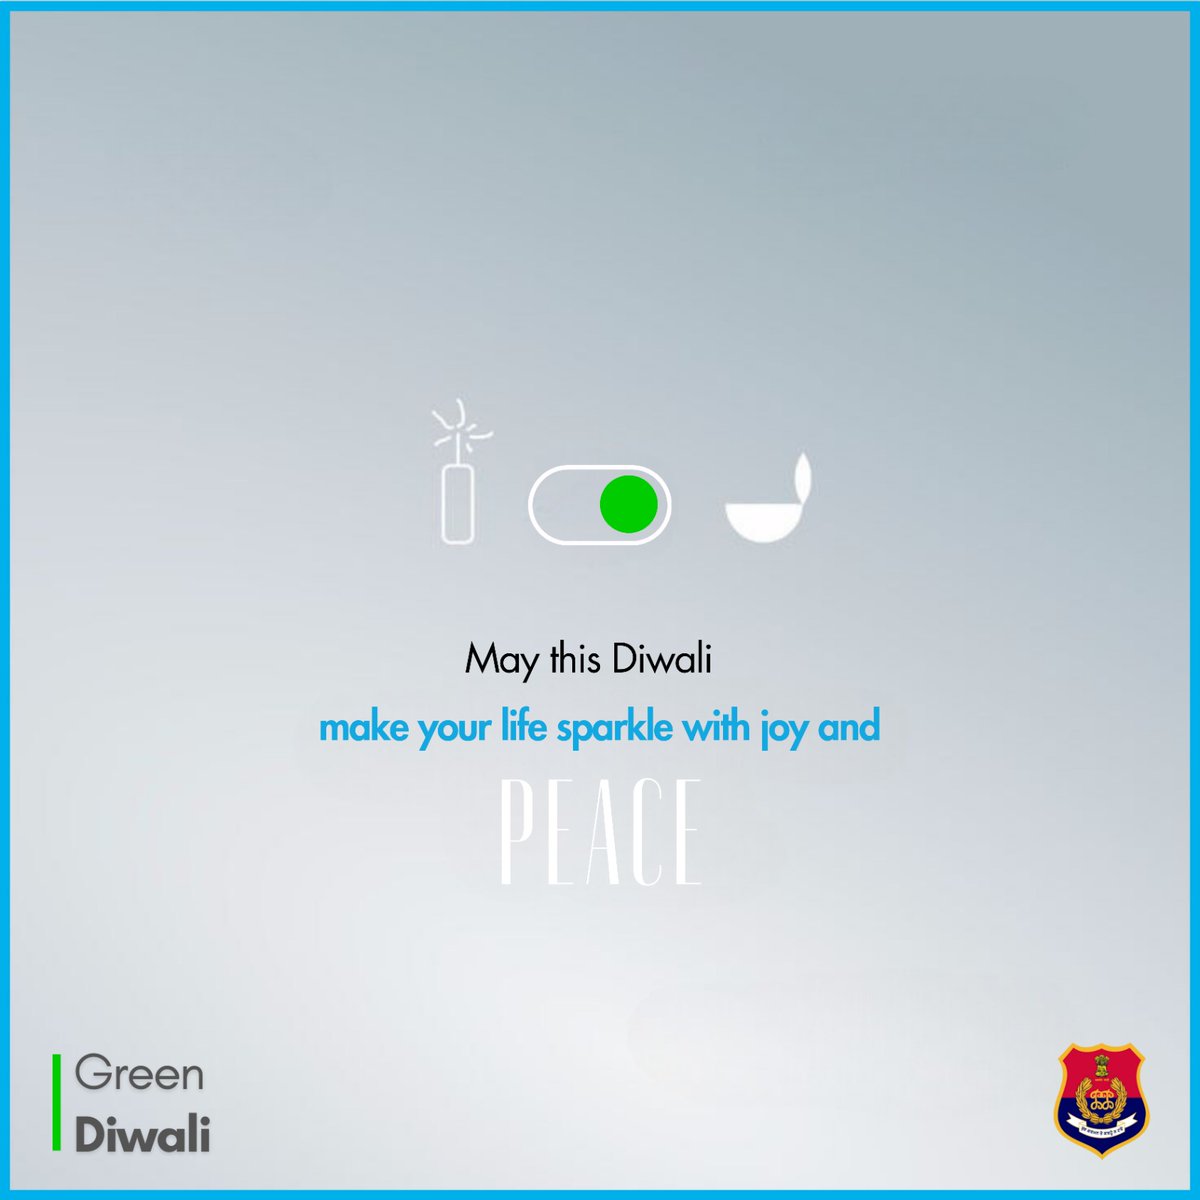 Wishing you a Diwali filled with joy and peace, where every moment sparkles with happiness. Let's celebrate responsibly for a #SafeDiwali and #GreenDiwali!